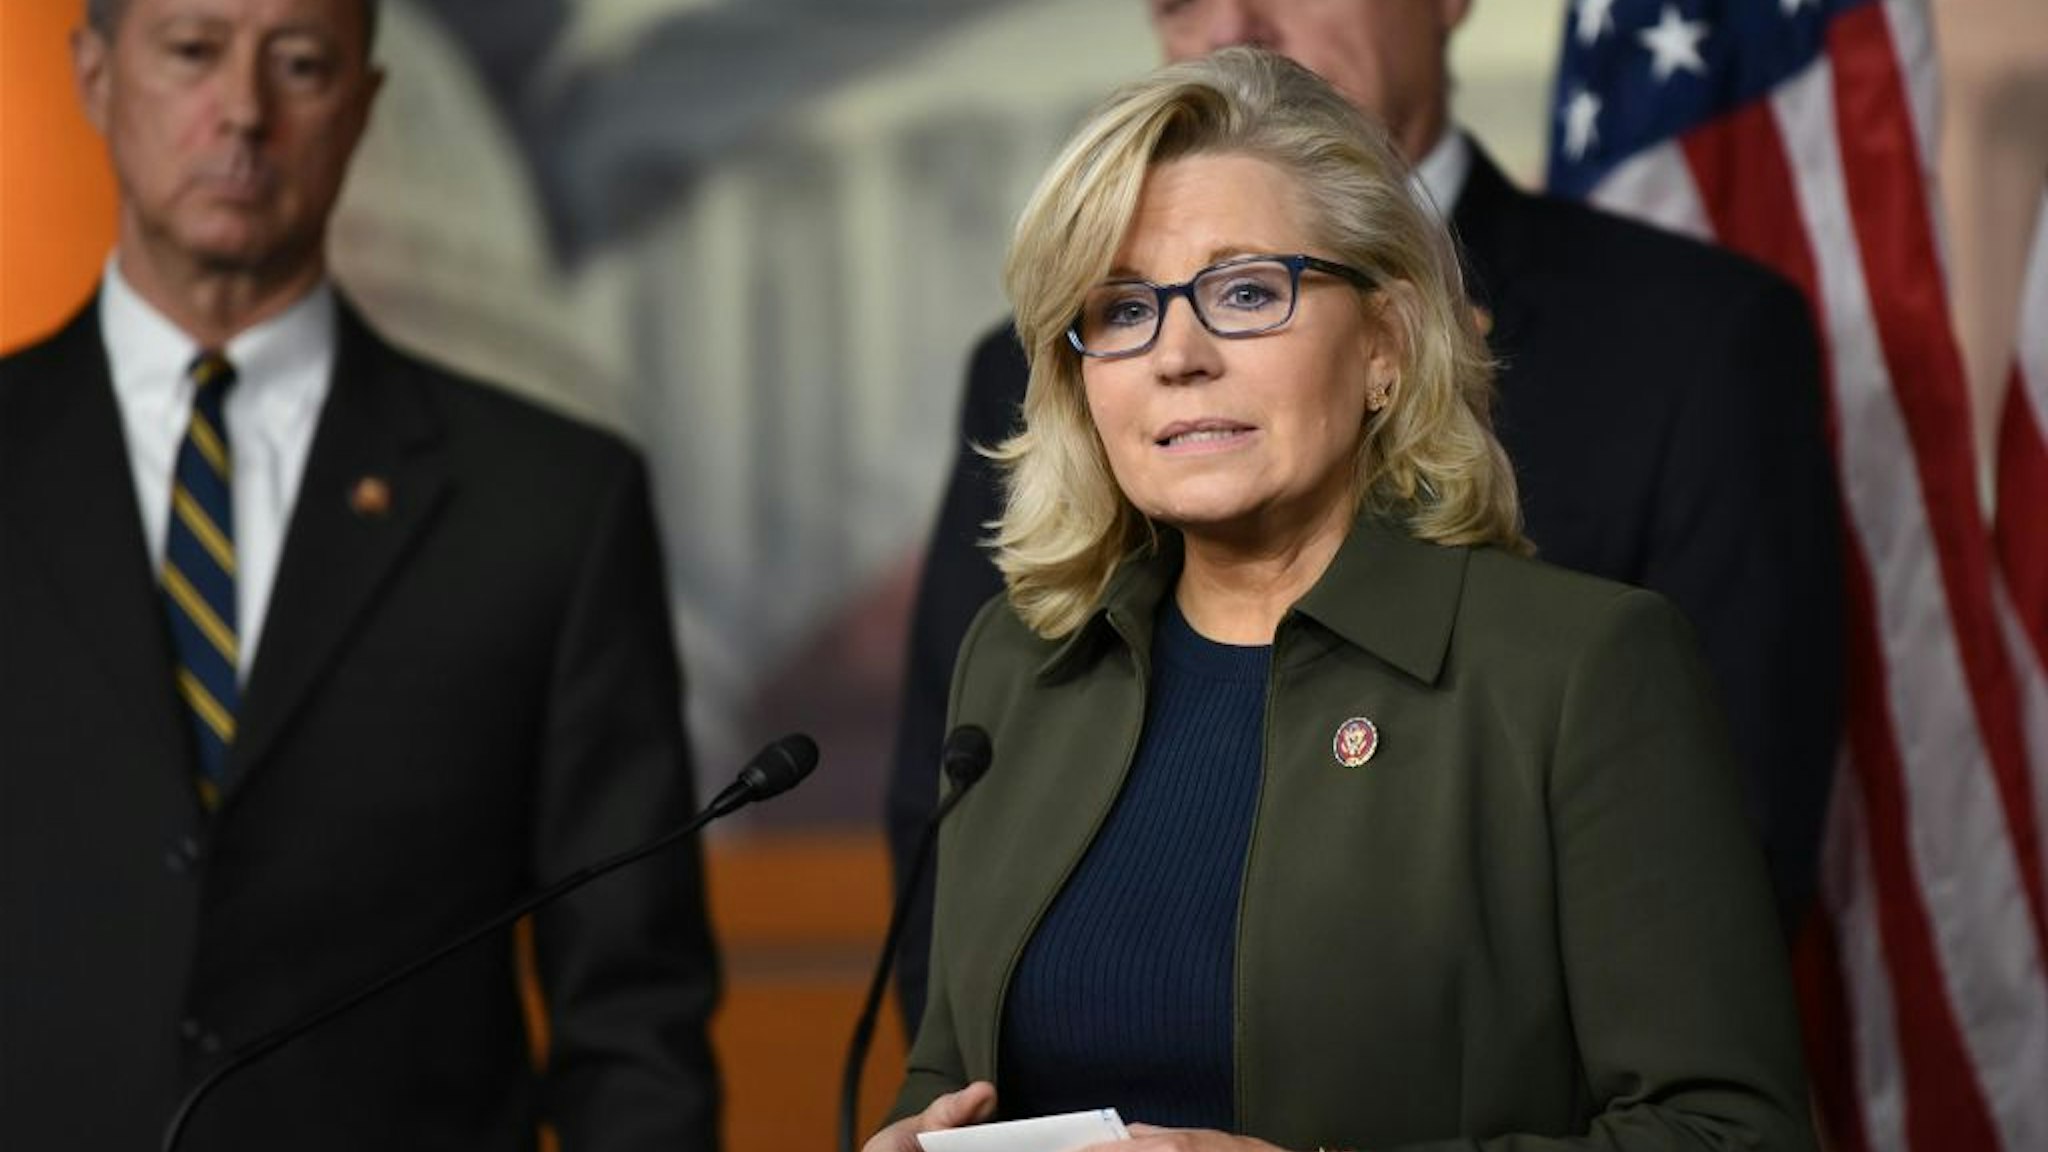 Liz Cheney speaks speaks during a news conference at the U.S. Capitol